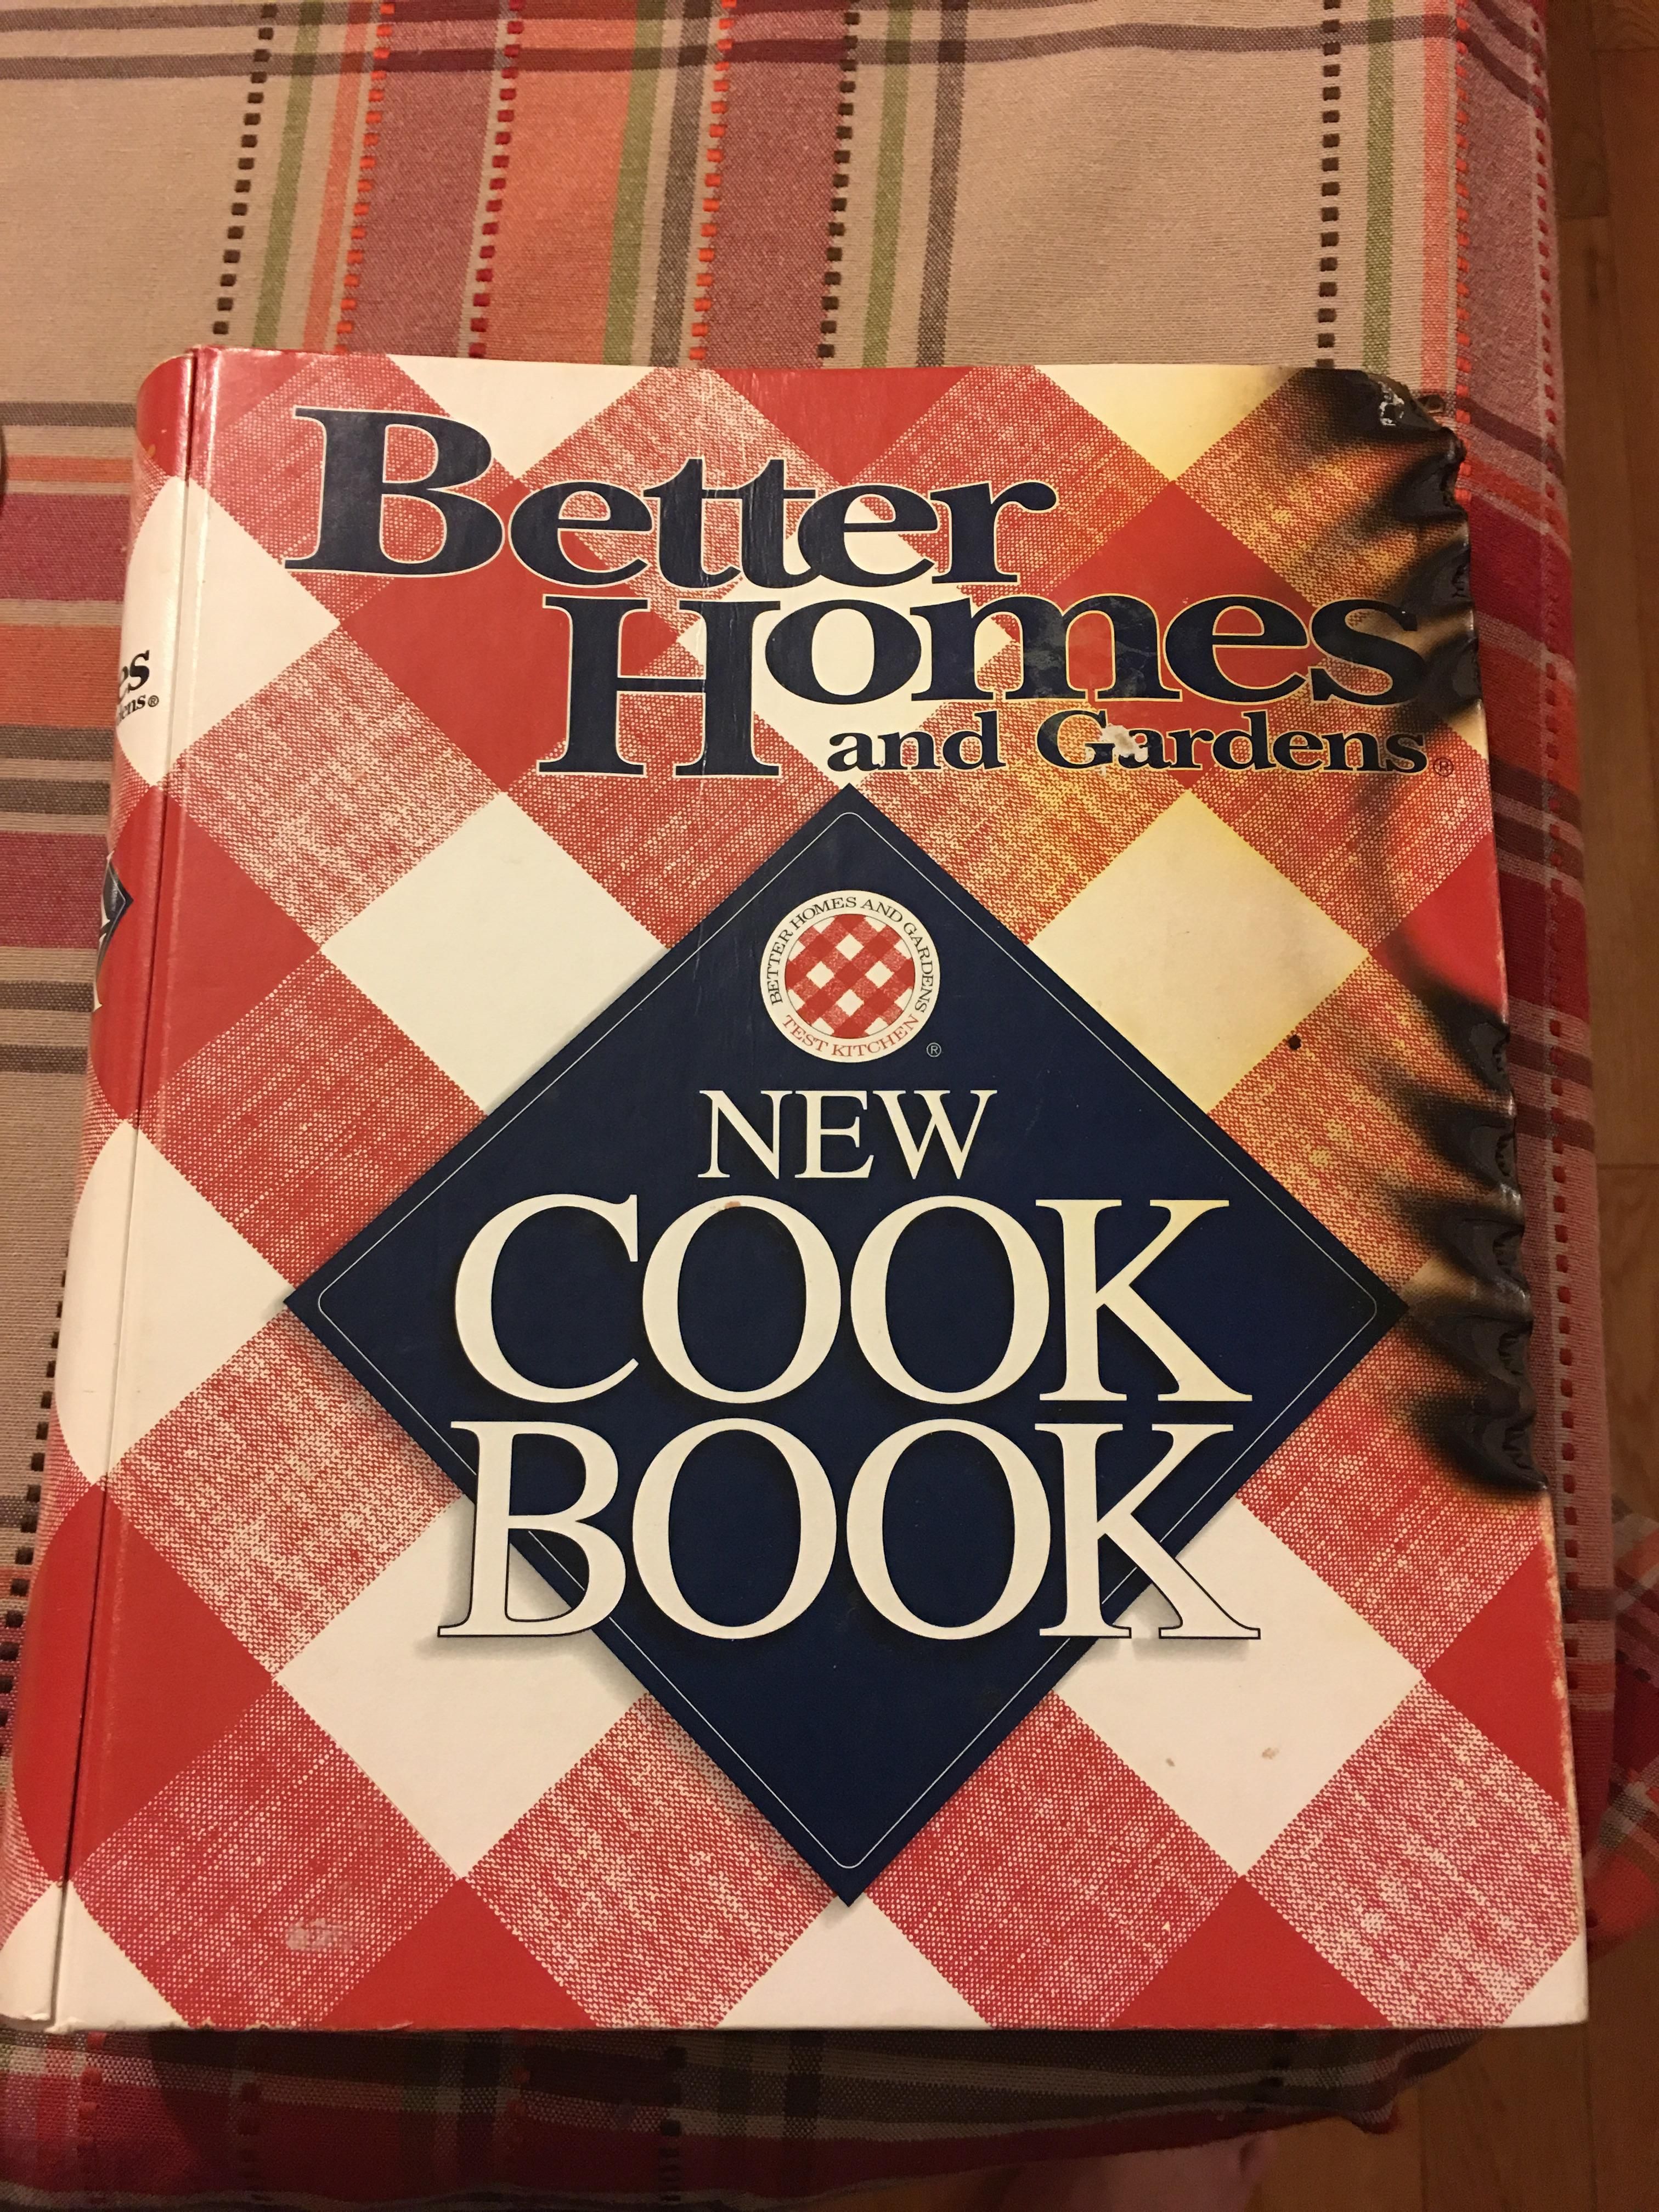 My wife tried cooking Thanksgiving dinner for us and actually burned the cook book.